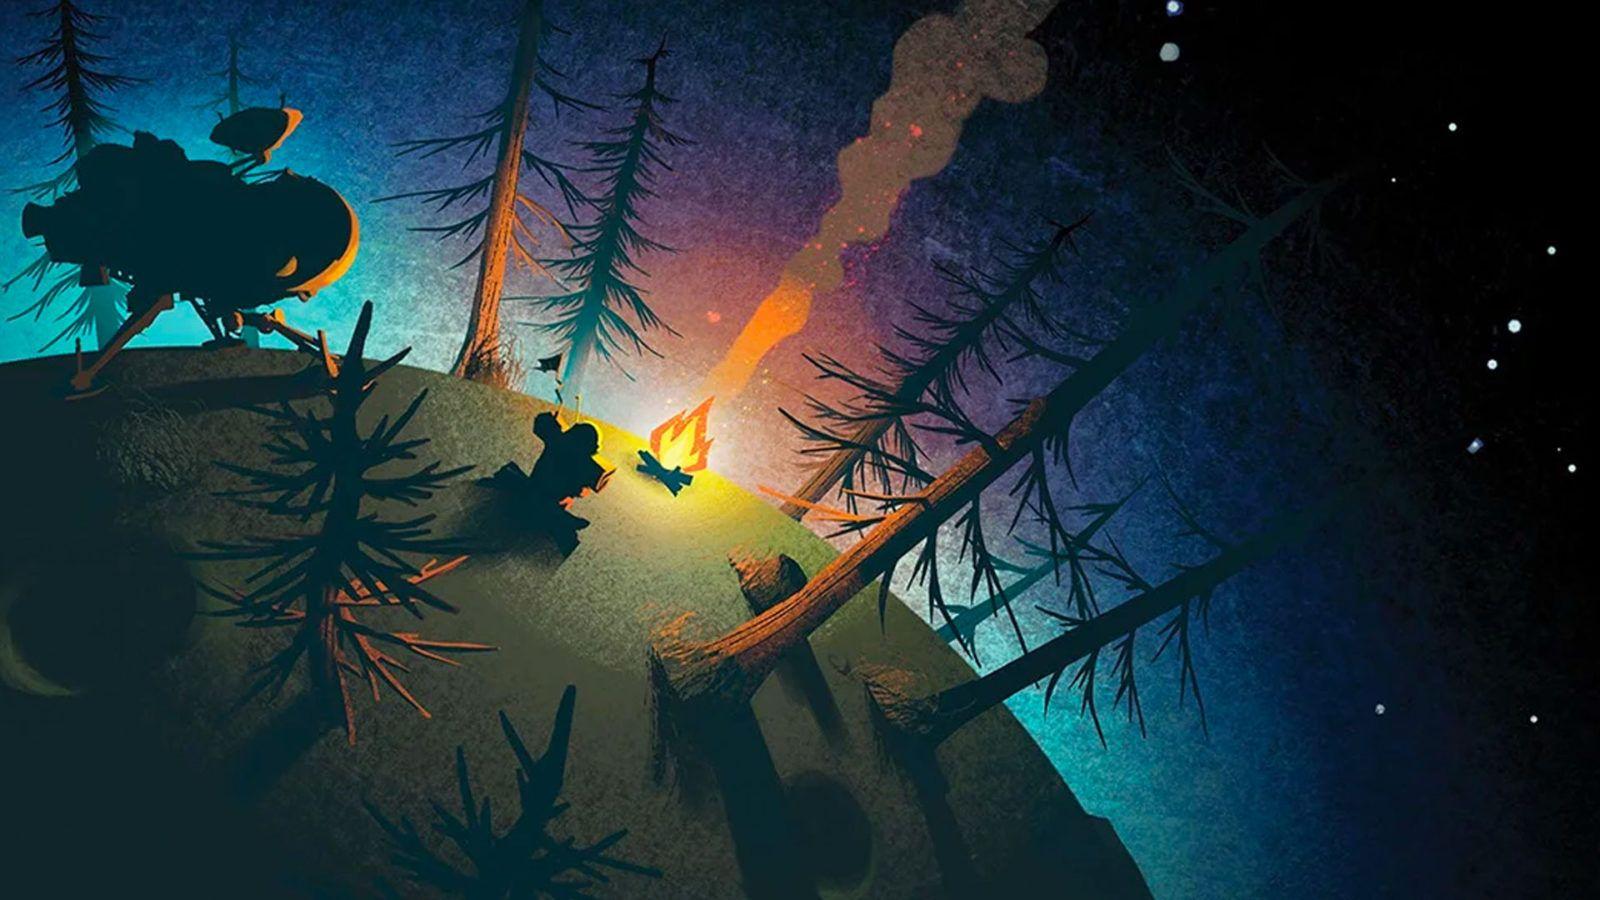 Download Outer Wilds Wallpaper Free for Android  Outer Wilds Wallpaper APK  Download  STEPrimocom